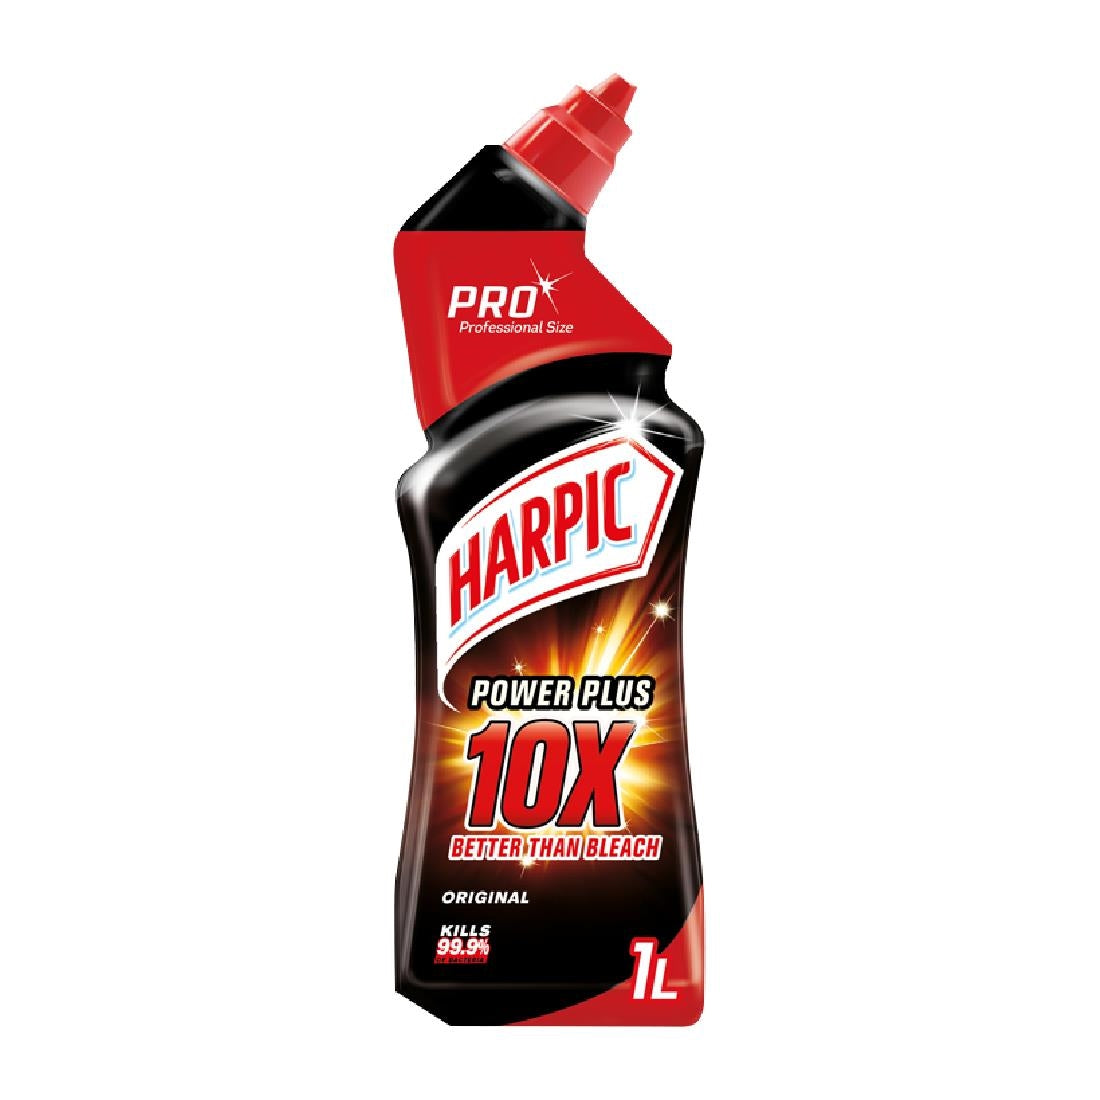 FT020 Harpic Original Power Plus Toilet Cleaner Ready To Use 1Ltr JD Catering Equipment Solutions Ltd